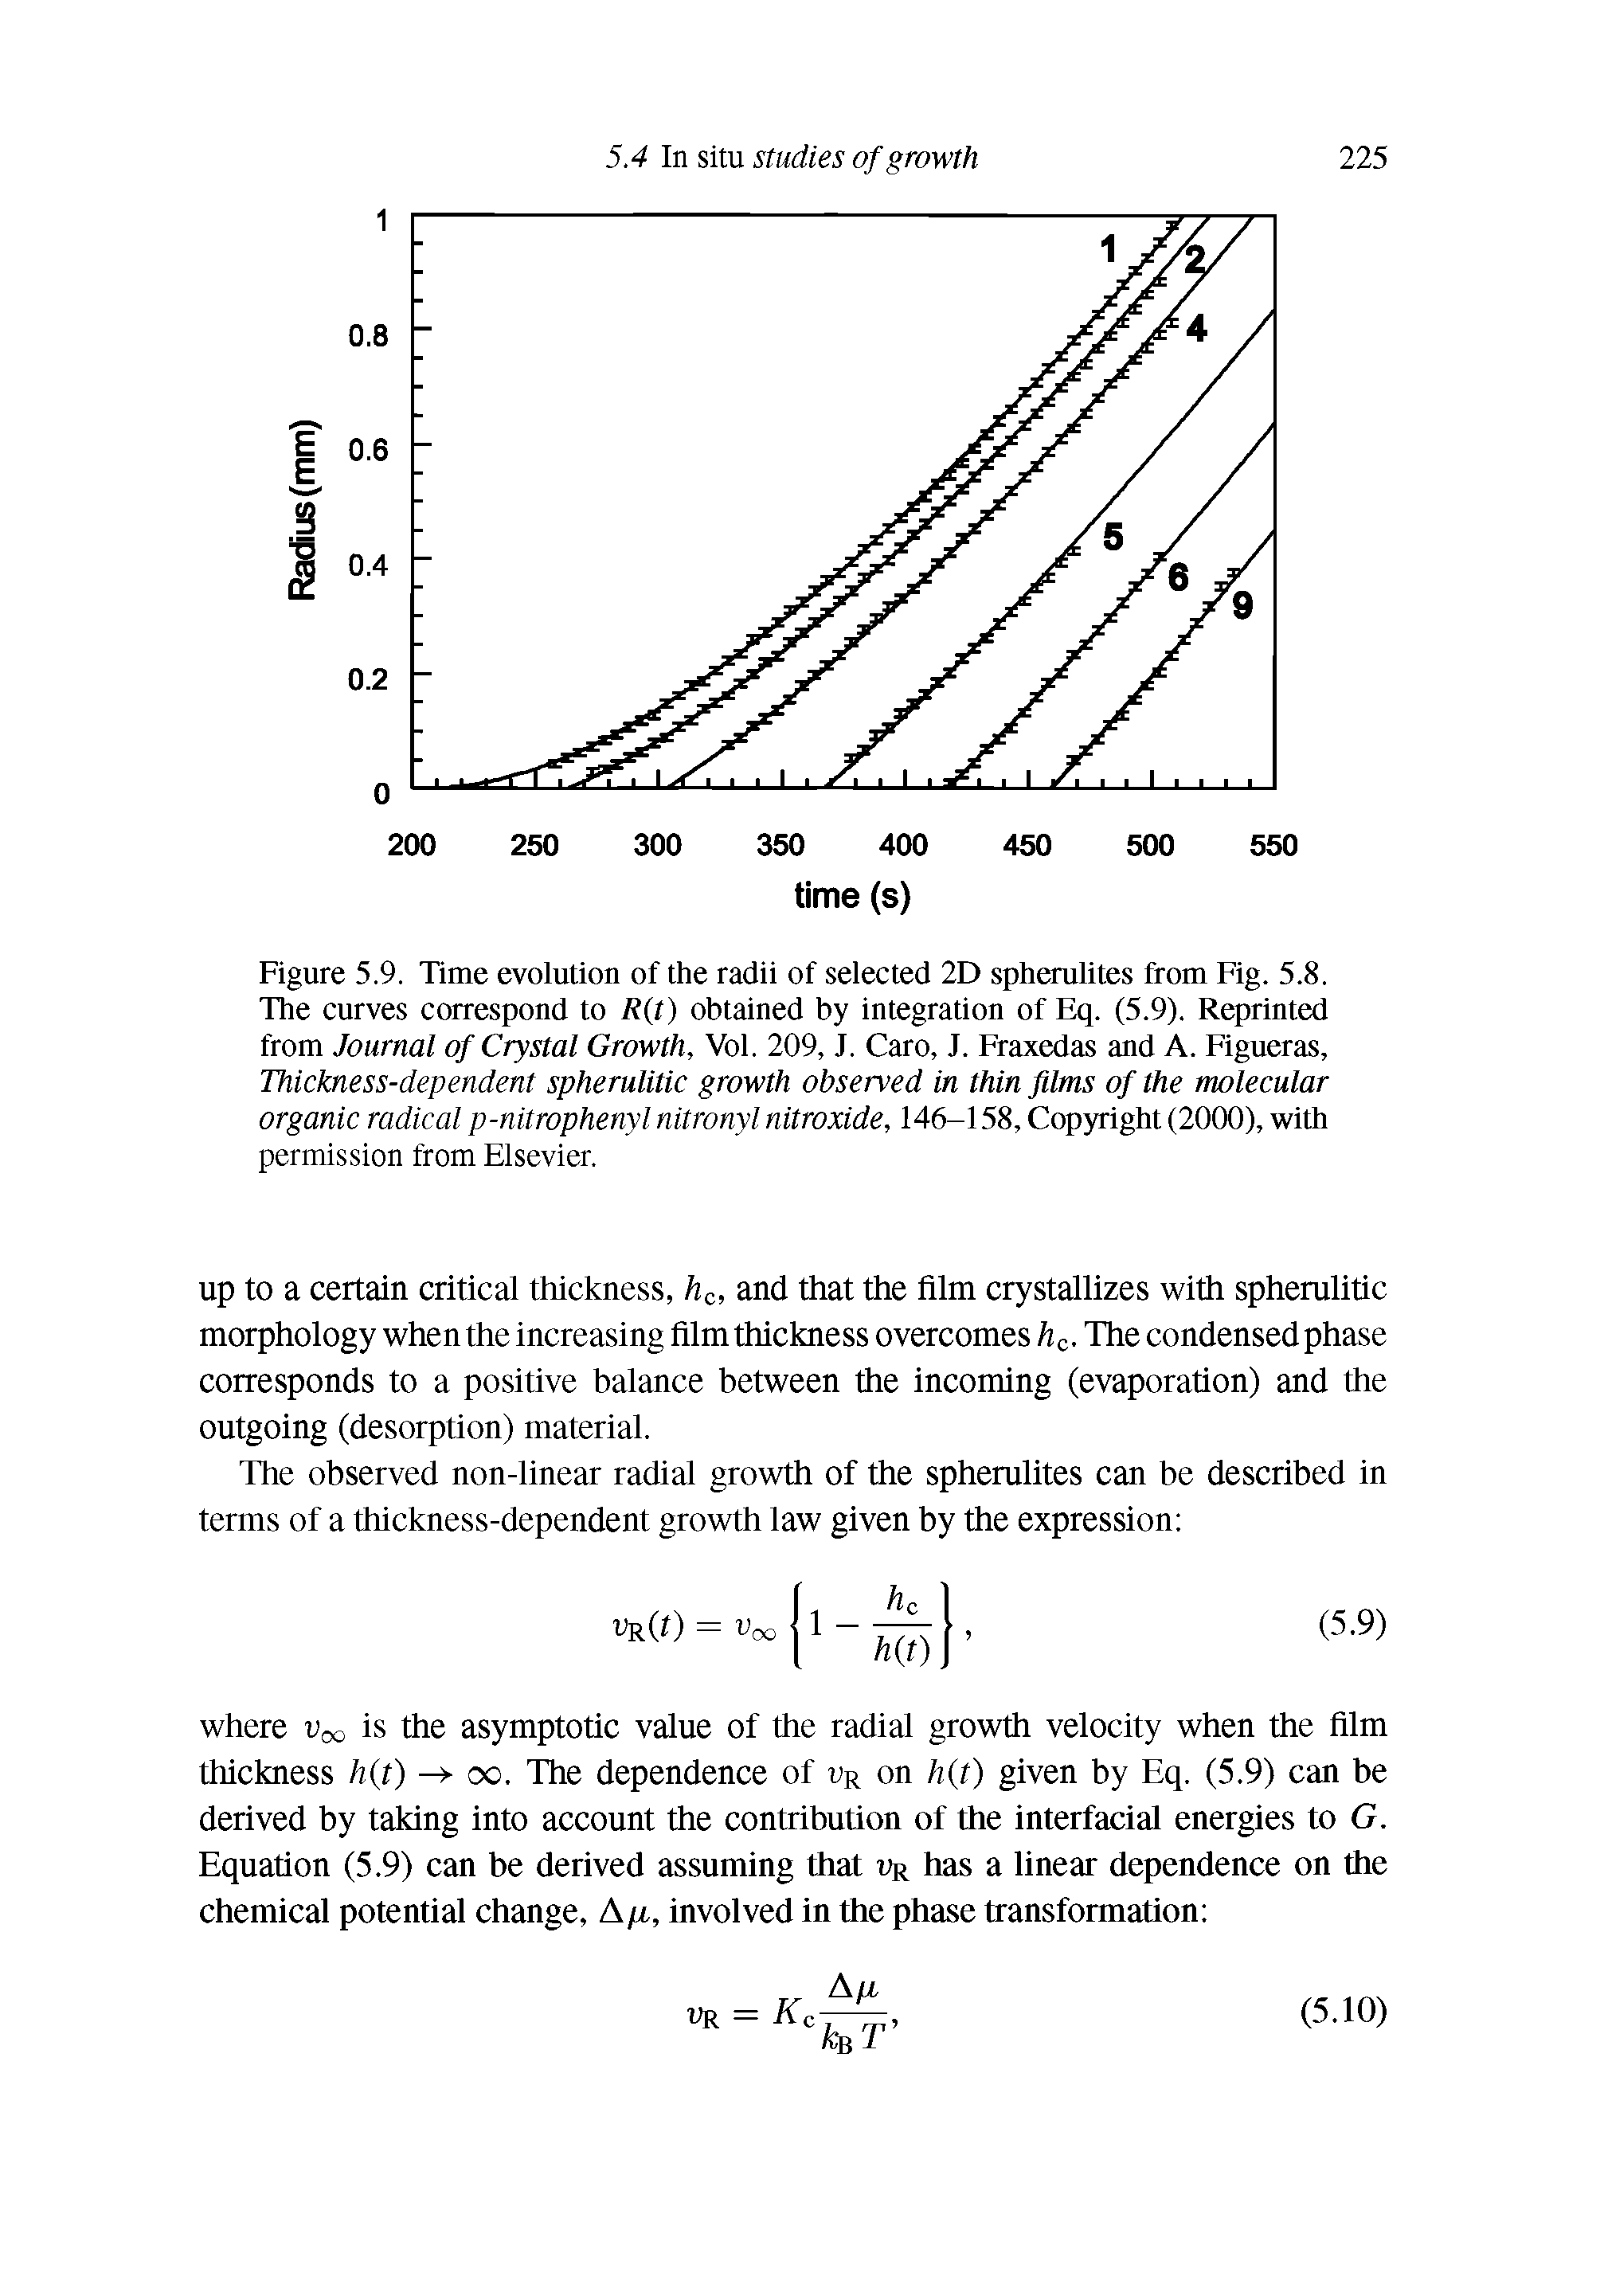 Figure 5.9. Time evolution of the radii of selected 2D spherulites from Fig. 5.8. The curves correspond to R t) obtained by integration of Eq. (5.9). Reprinted from Journal of Crystal Growth, Vol. 209, J. Caro, J. Fraxedas and A. Figueras, Thickness-dependent spherulitic growth observed in thin films of the molecular organic radical p-nitrophenyl nitronyl nitroxide, 146-158, Copyright (2000), with permission from Elsevier.